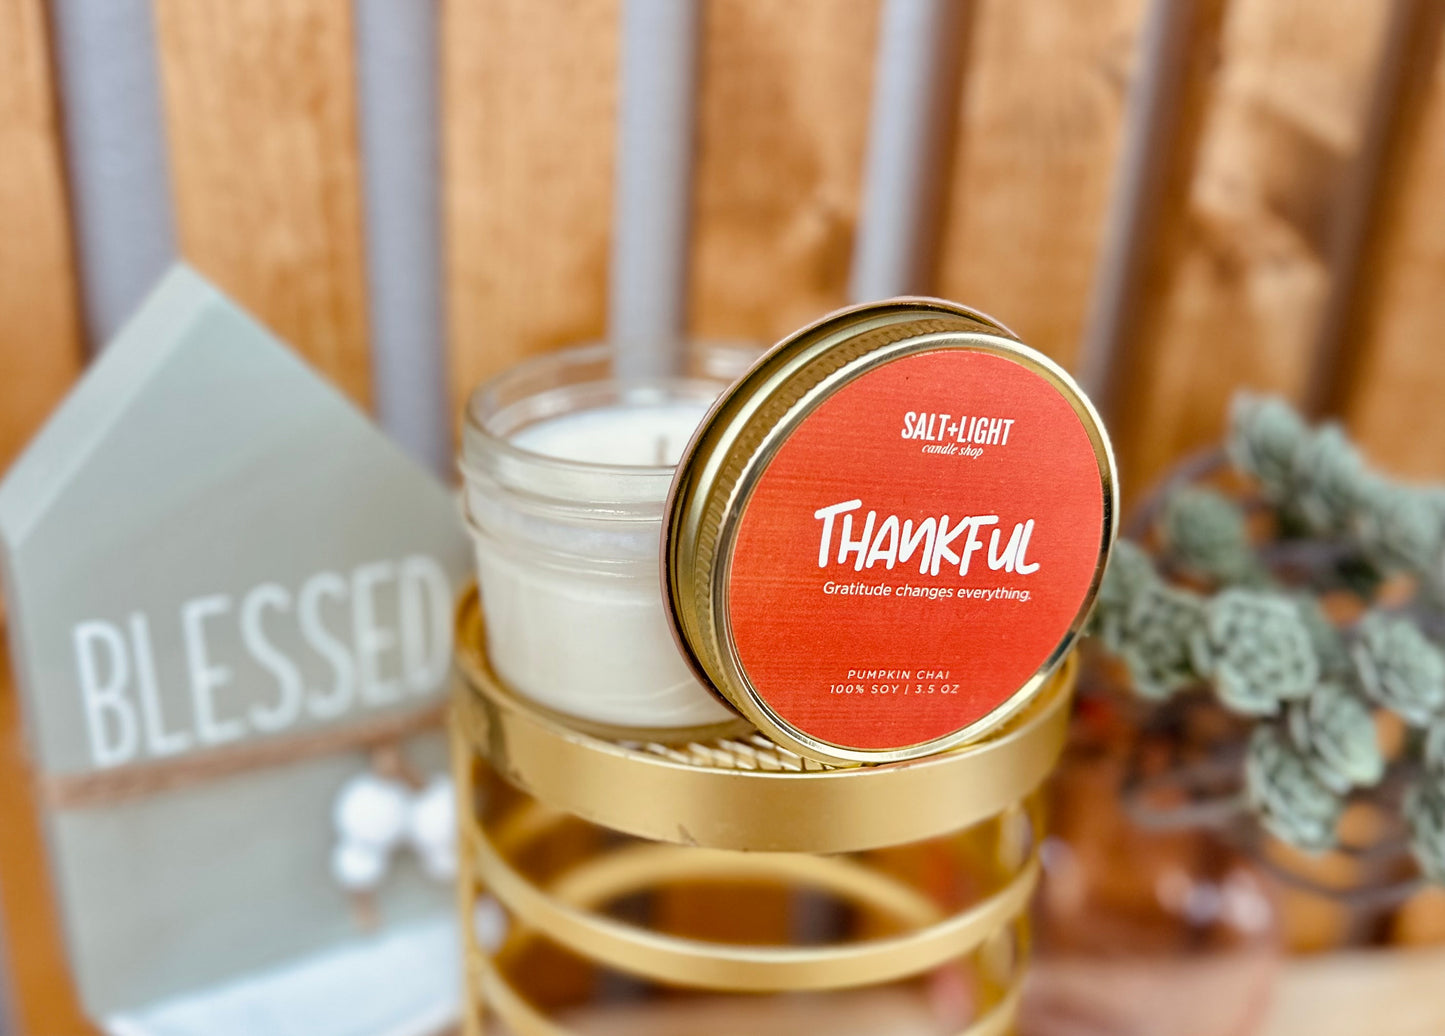 Thankful Travel Soy Candle